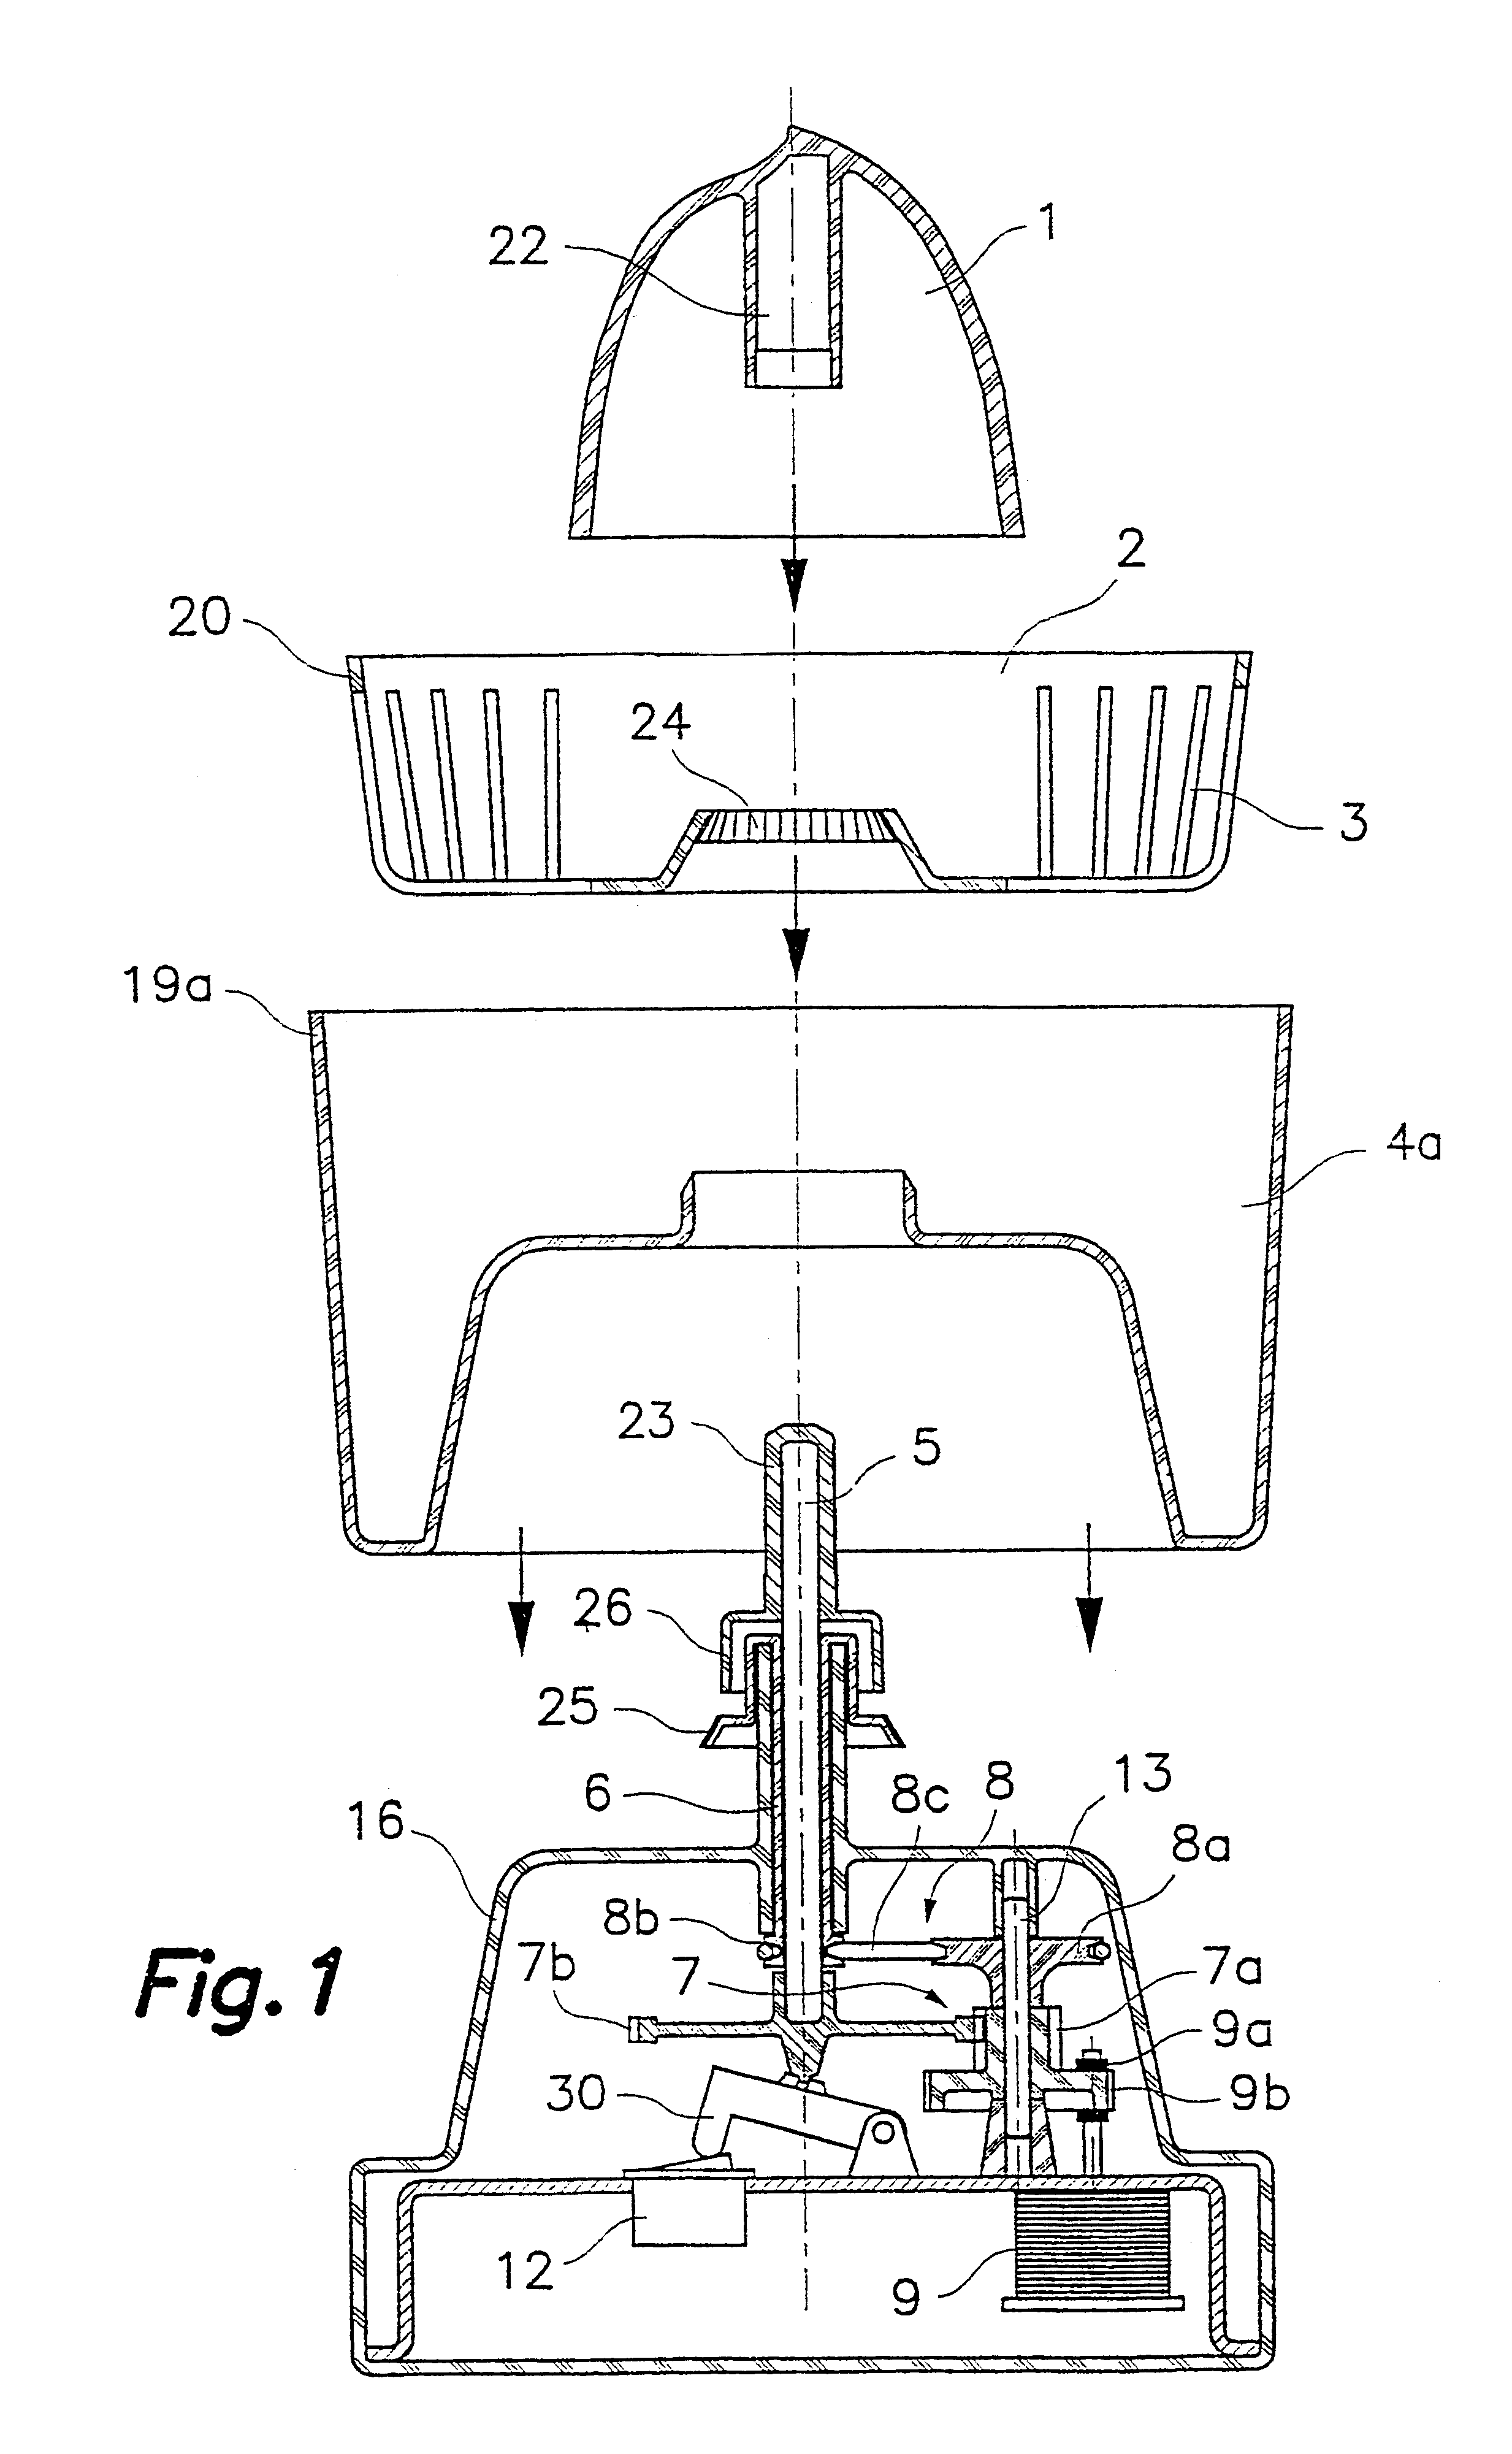 Citrus fruit squeezer with centrifugation of the squeezed product